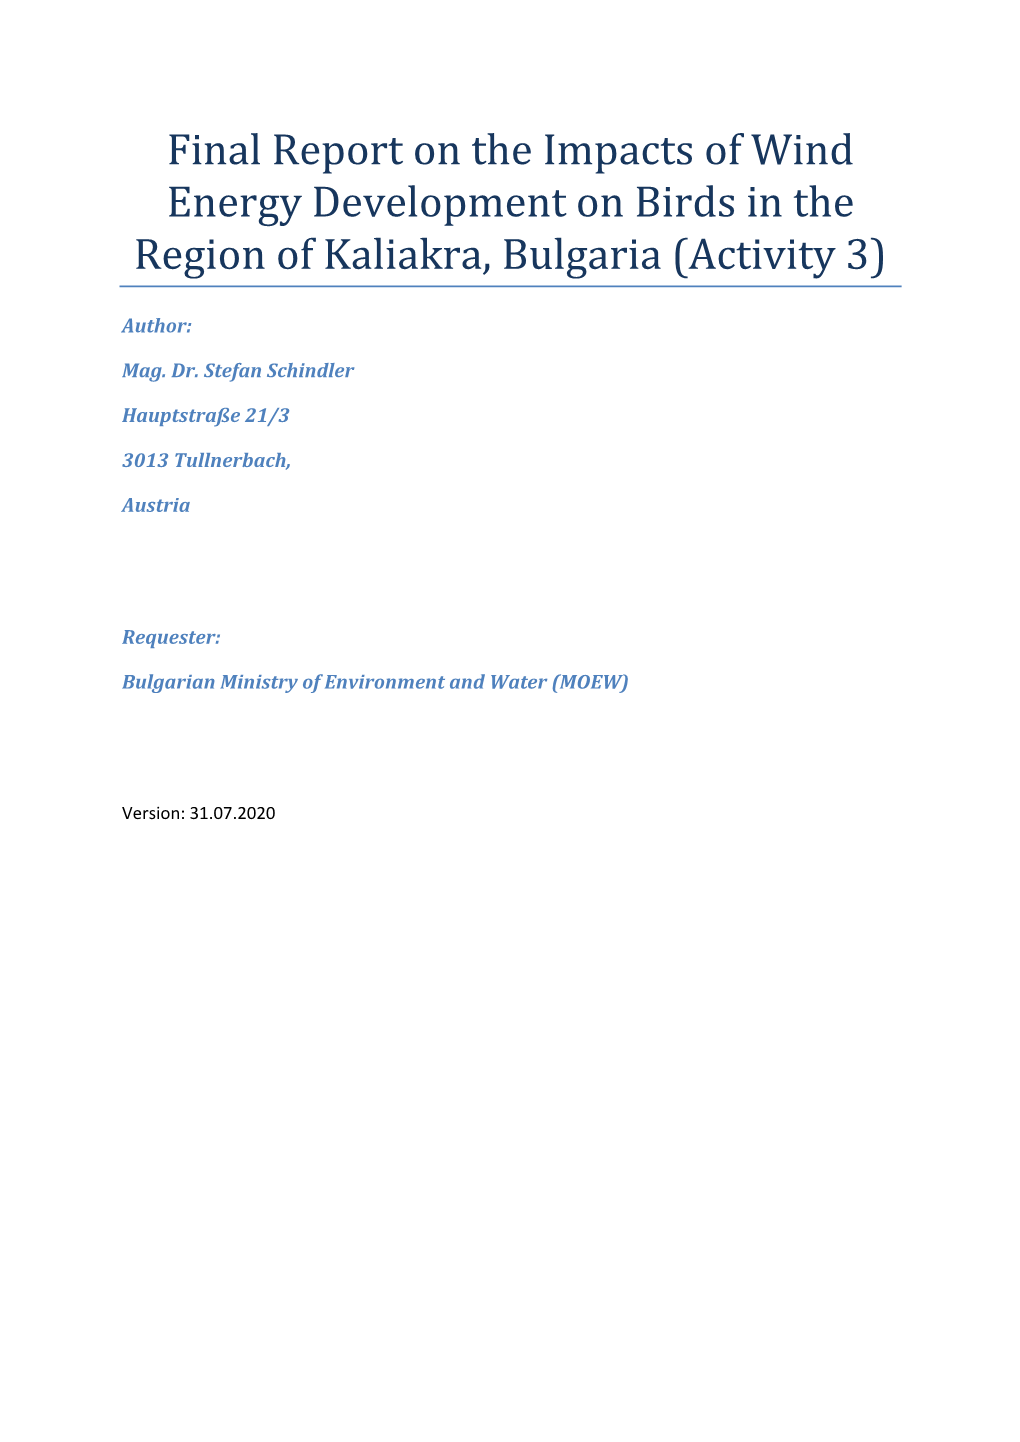 Final Report on the Impacts of Wind Energy Development on Birds in the Region of Kaliakra, Bulgaria (Activity 3)